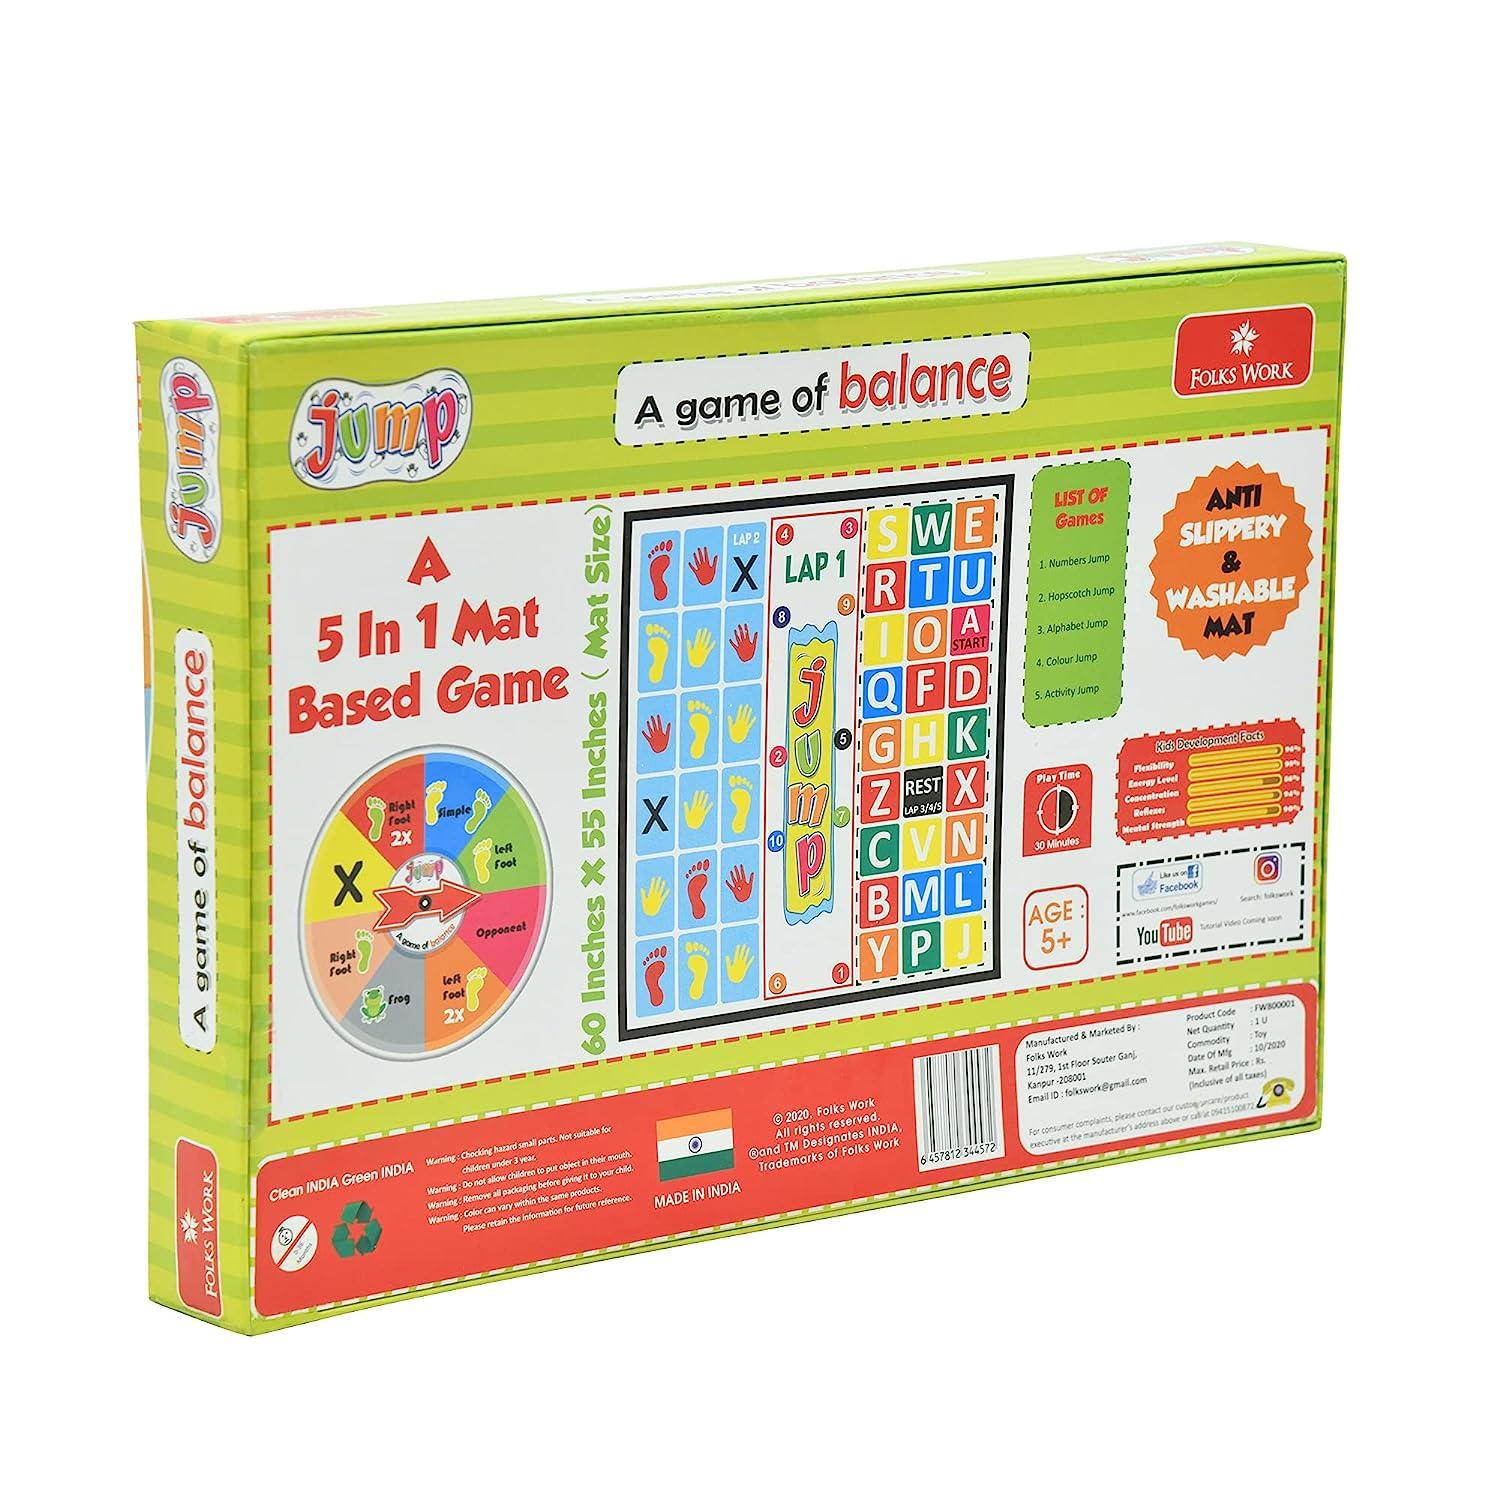 Folks work Jumping Board game for kids